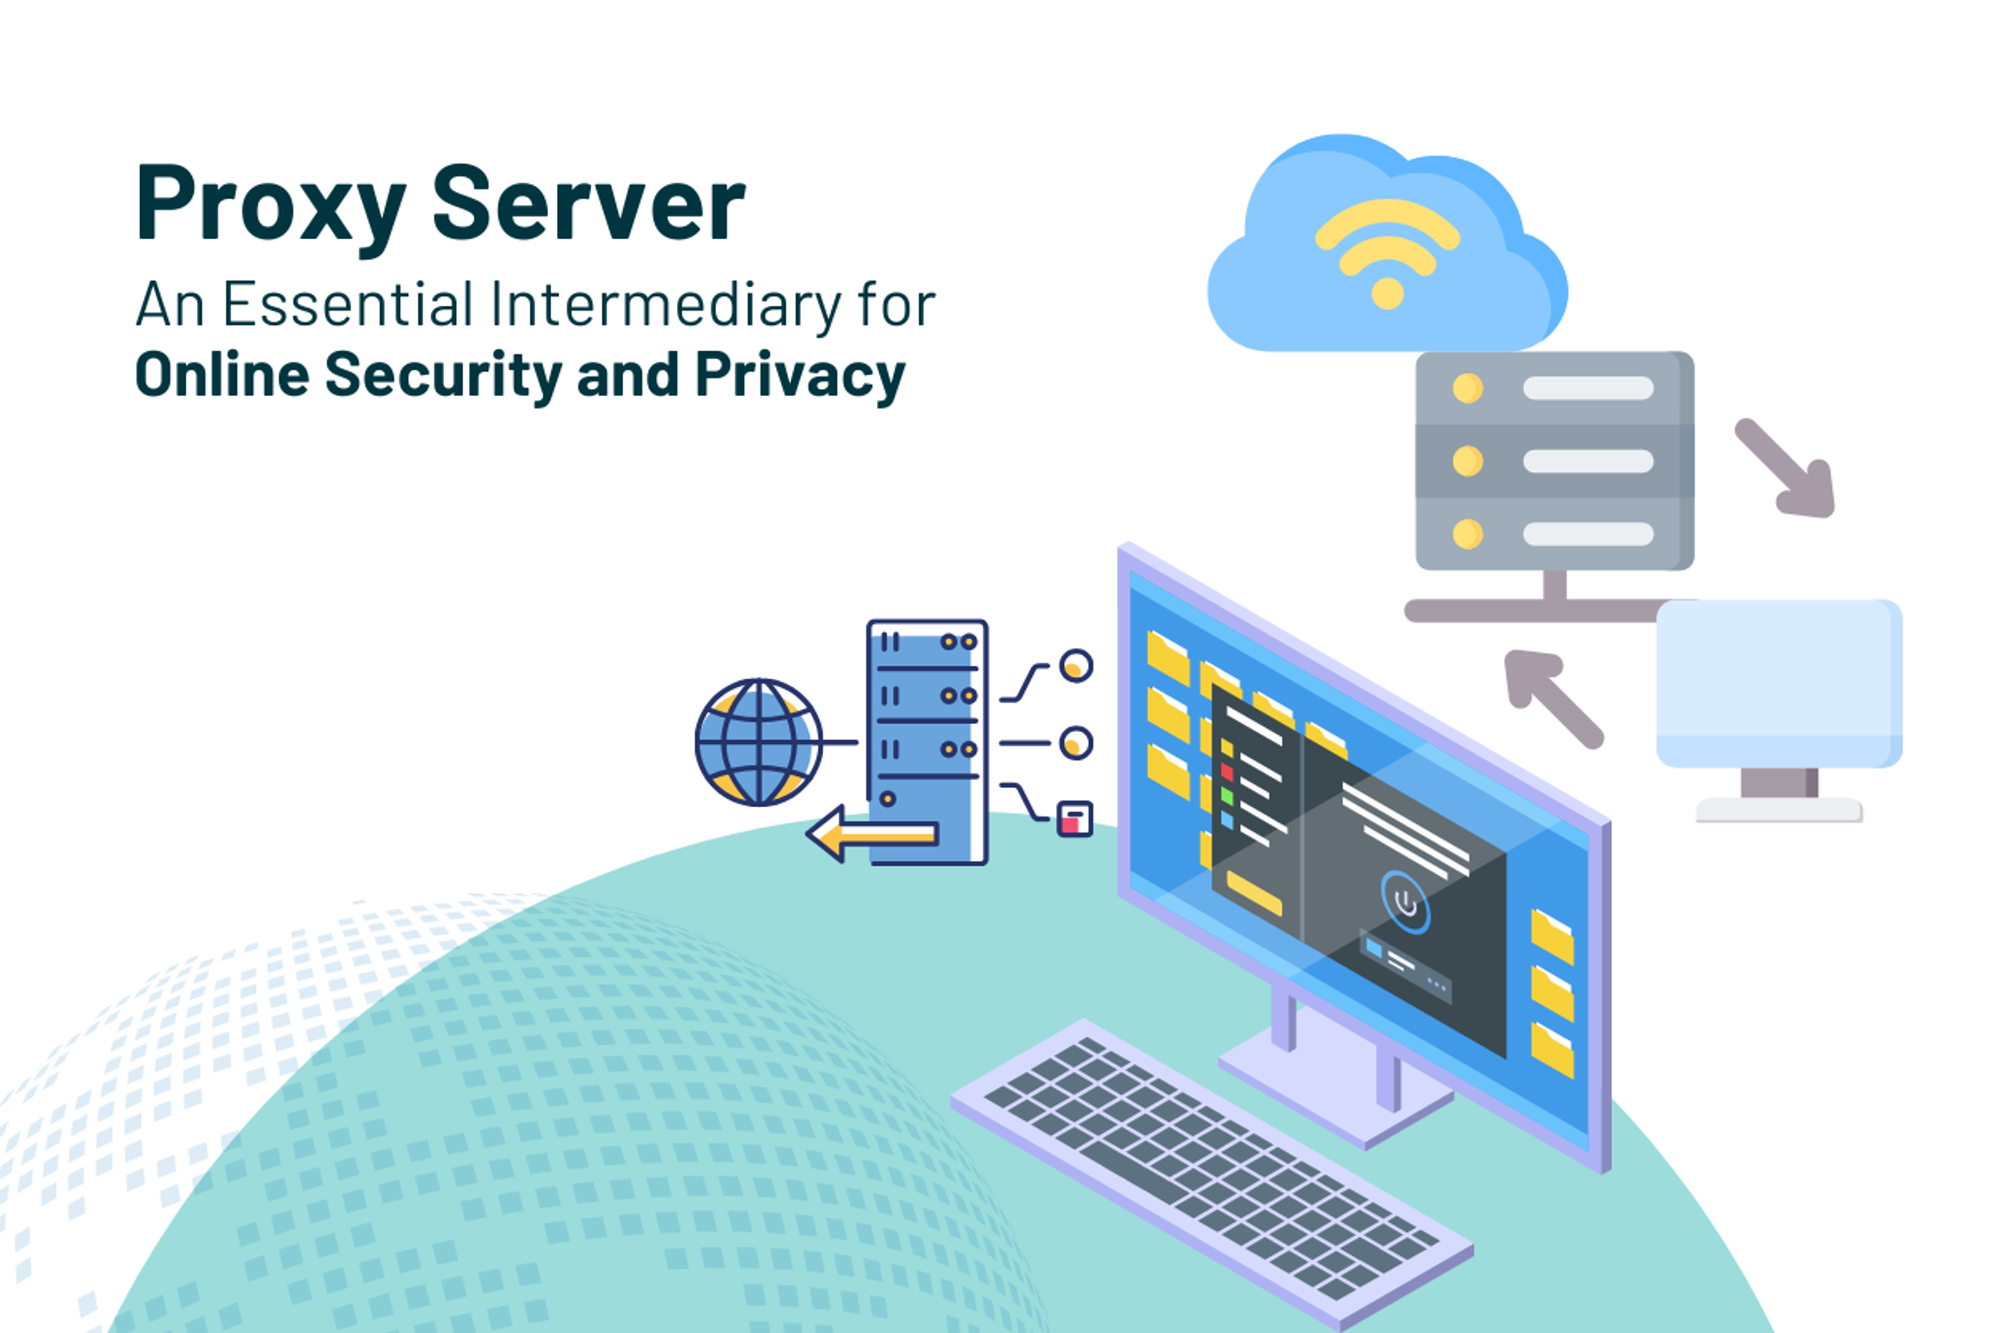 Proxy Server: An Essential Intermediary for Online Security and Privacy